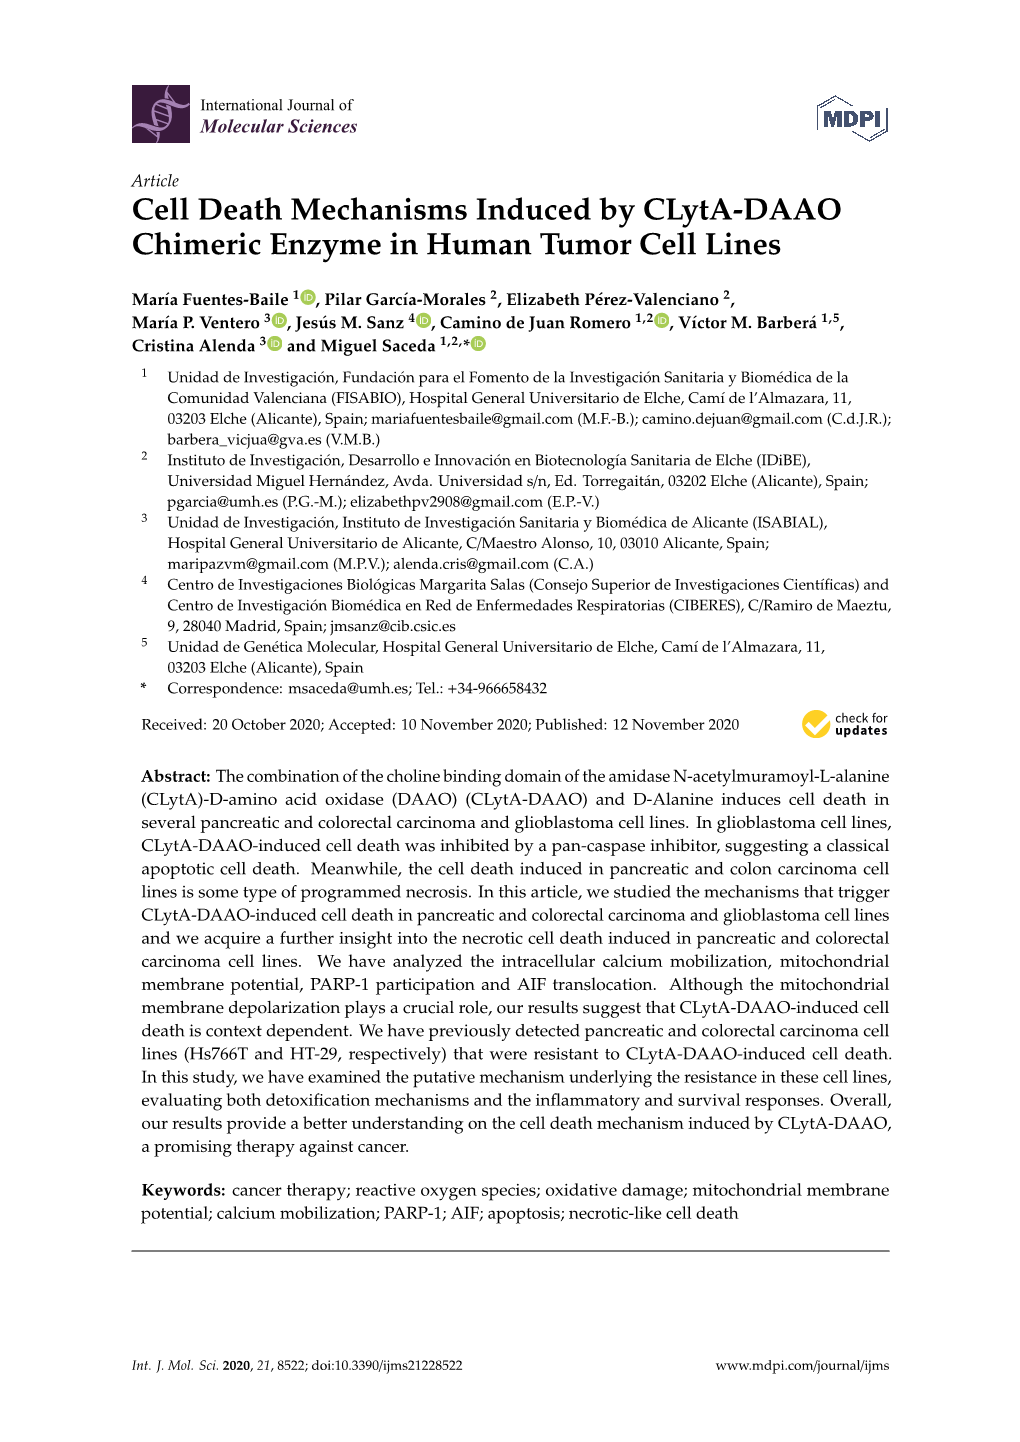 Cell Death Mechanisms Induced by Clyta-DAAO Chimeric Enzyme in Human Tumor Cell Lines